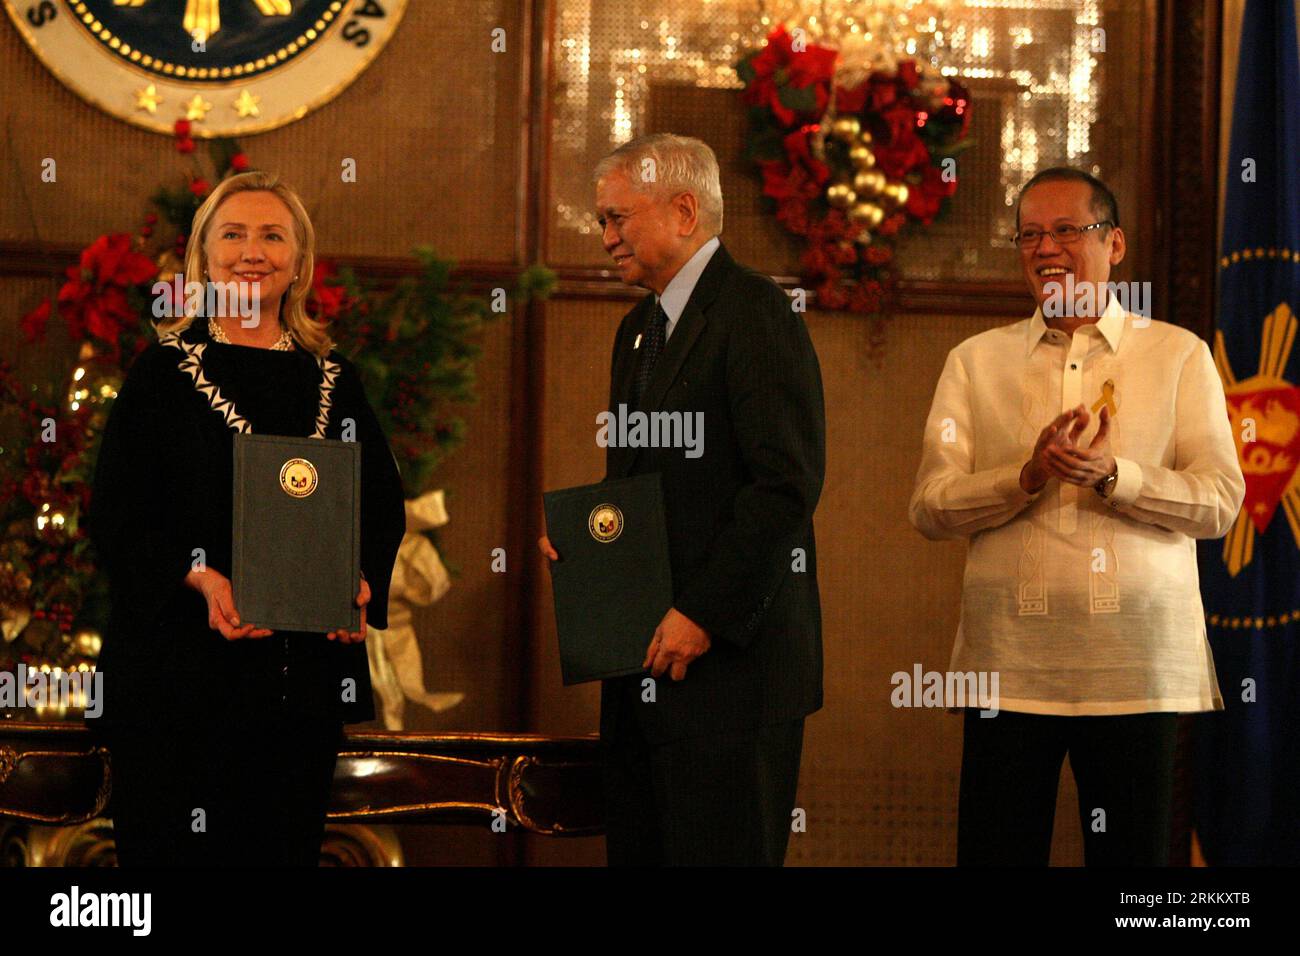 Bildnummer: 56287359  Datum: 16.11.2011  Copyright: imago/Xinhua (111116) -- MANILA, Nov. 16, 2011 (Xinhua) -- Philippine President Benigno S. Aquino III (R) applauds US Secretary of State Hillary Clinton (L) and Philippine Foreign Affairs Secretary Albert del Rosario (C) in the Malacanan Palace in Manila, capital of the Philippines, on Nov. 16, 2011. The Philippines and the United States signed here on Wednesday a five-year program that will enhance Manila s capability to create a more competitive business environment, strengthen the rule of law and support fiscal stability. (Xinhua/Rouelle U Stock Photo